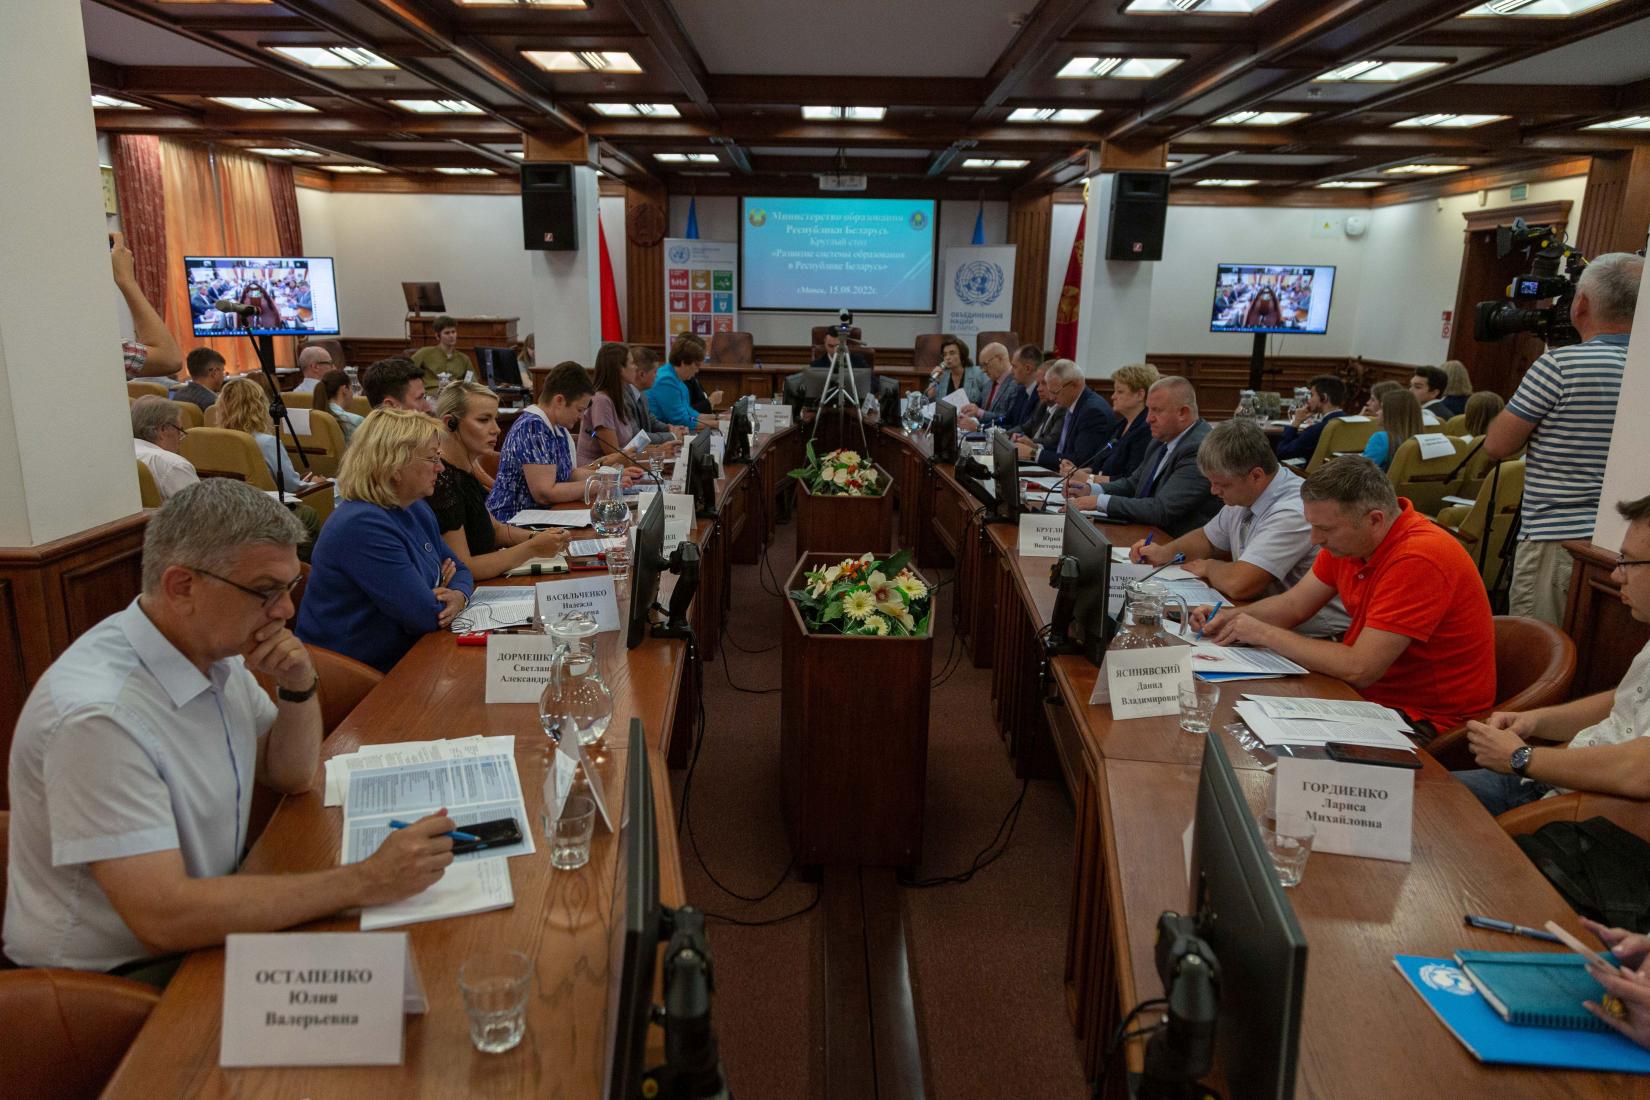 Belarusian State University of Informatics and Radioelectronics hosted national consultations in the form of round table discussions in the lead up to the Transforming Education Summit